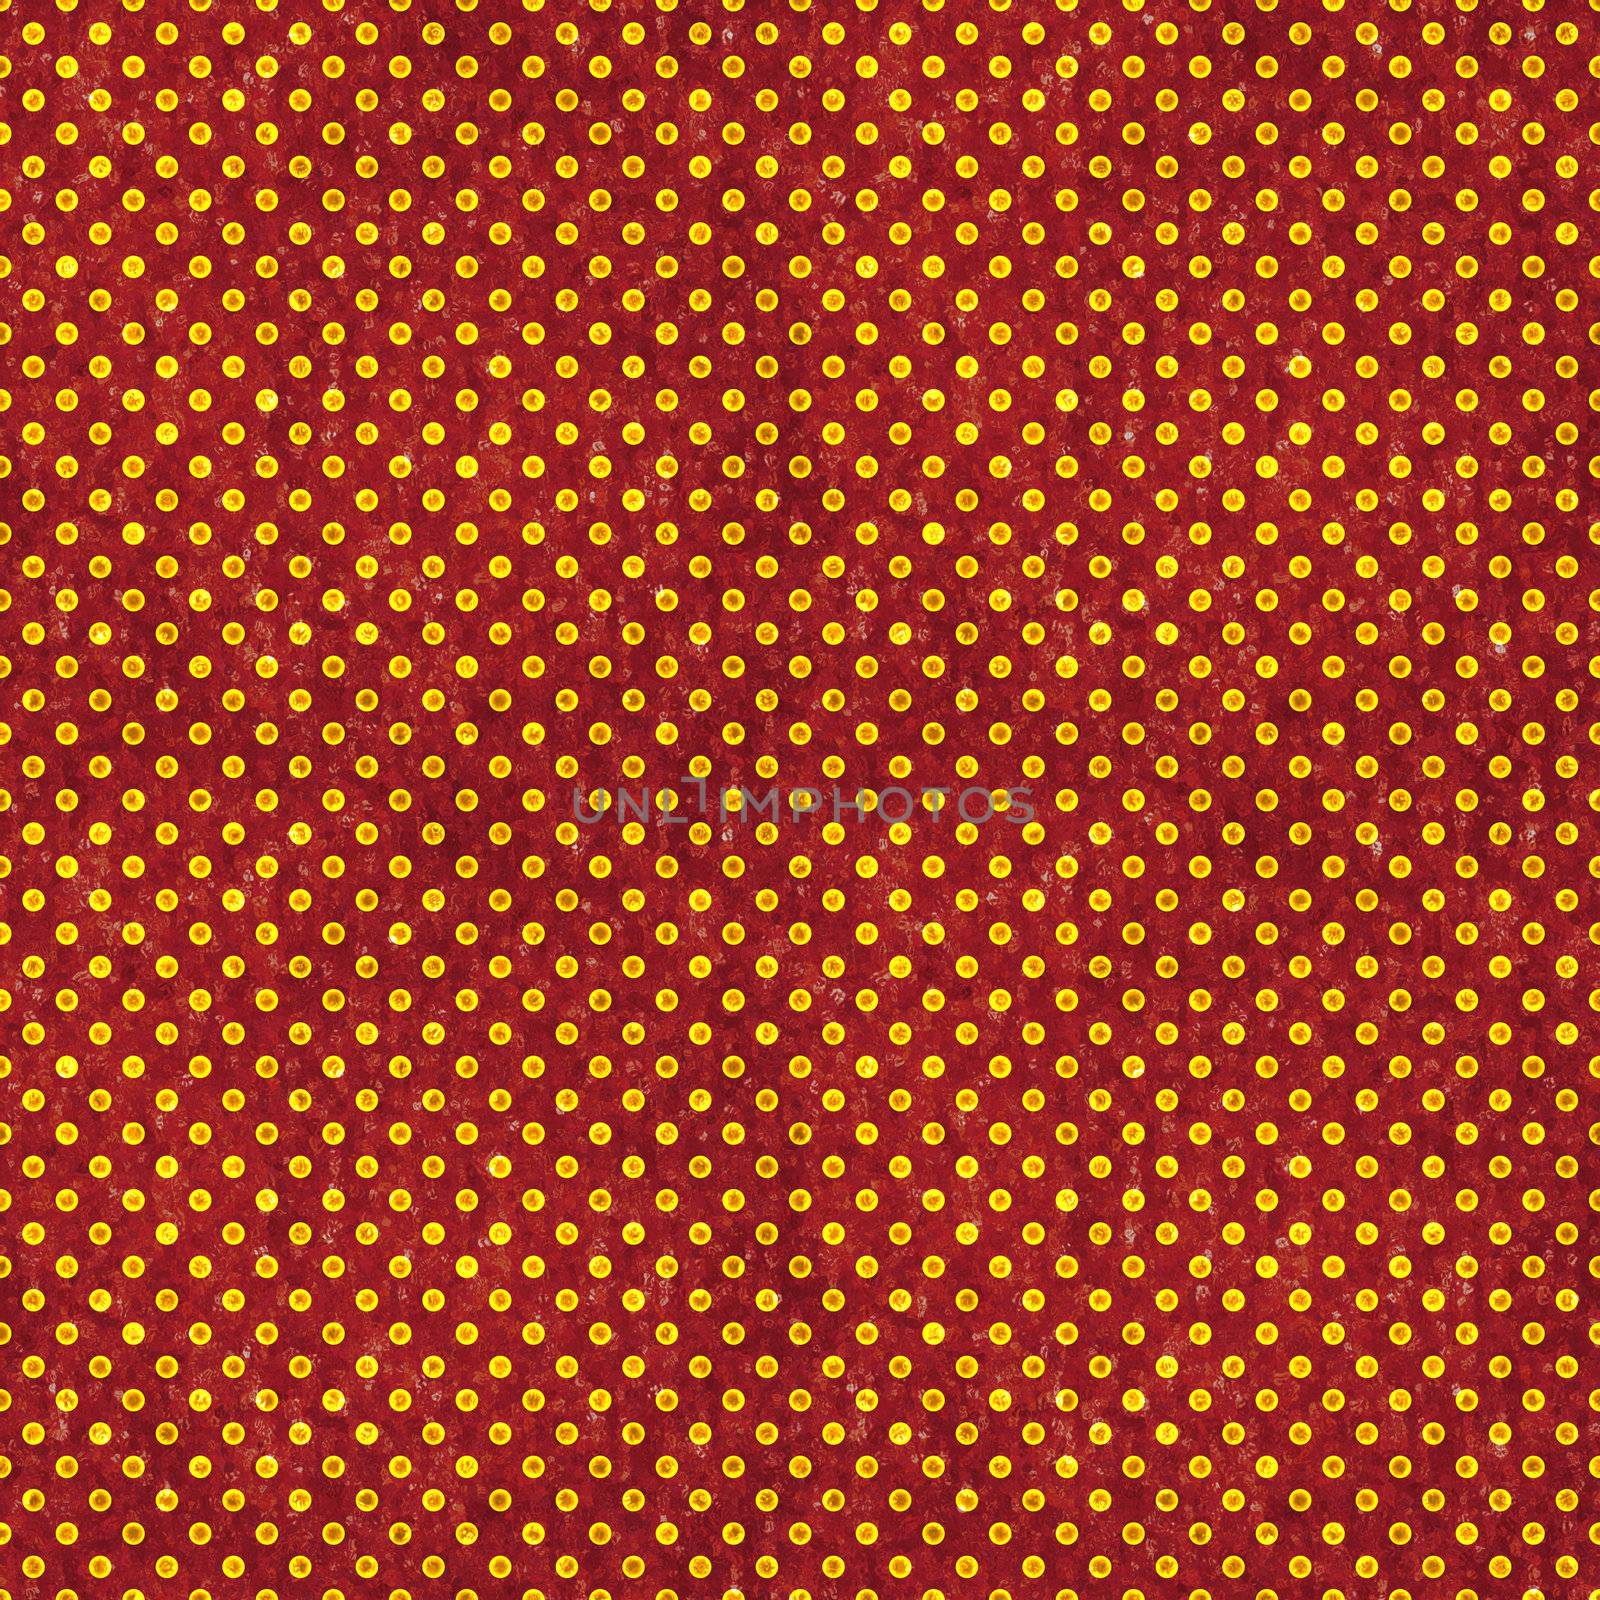 Glowing small gold polka dots on deep red textured background. Seamless